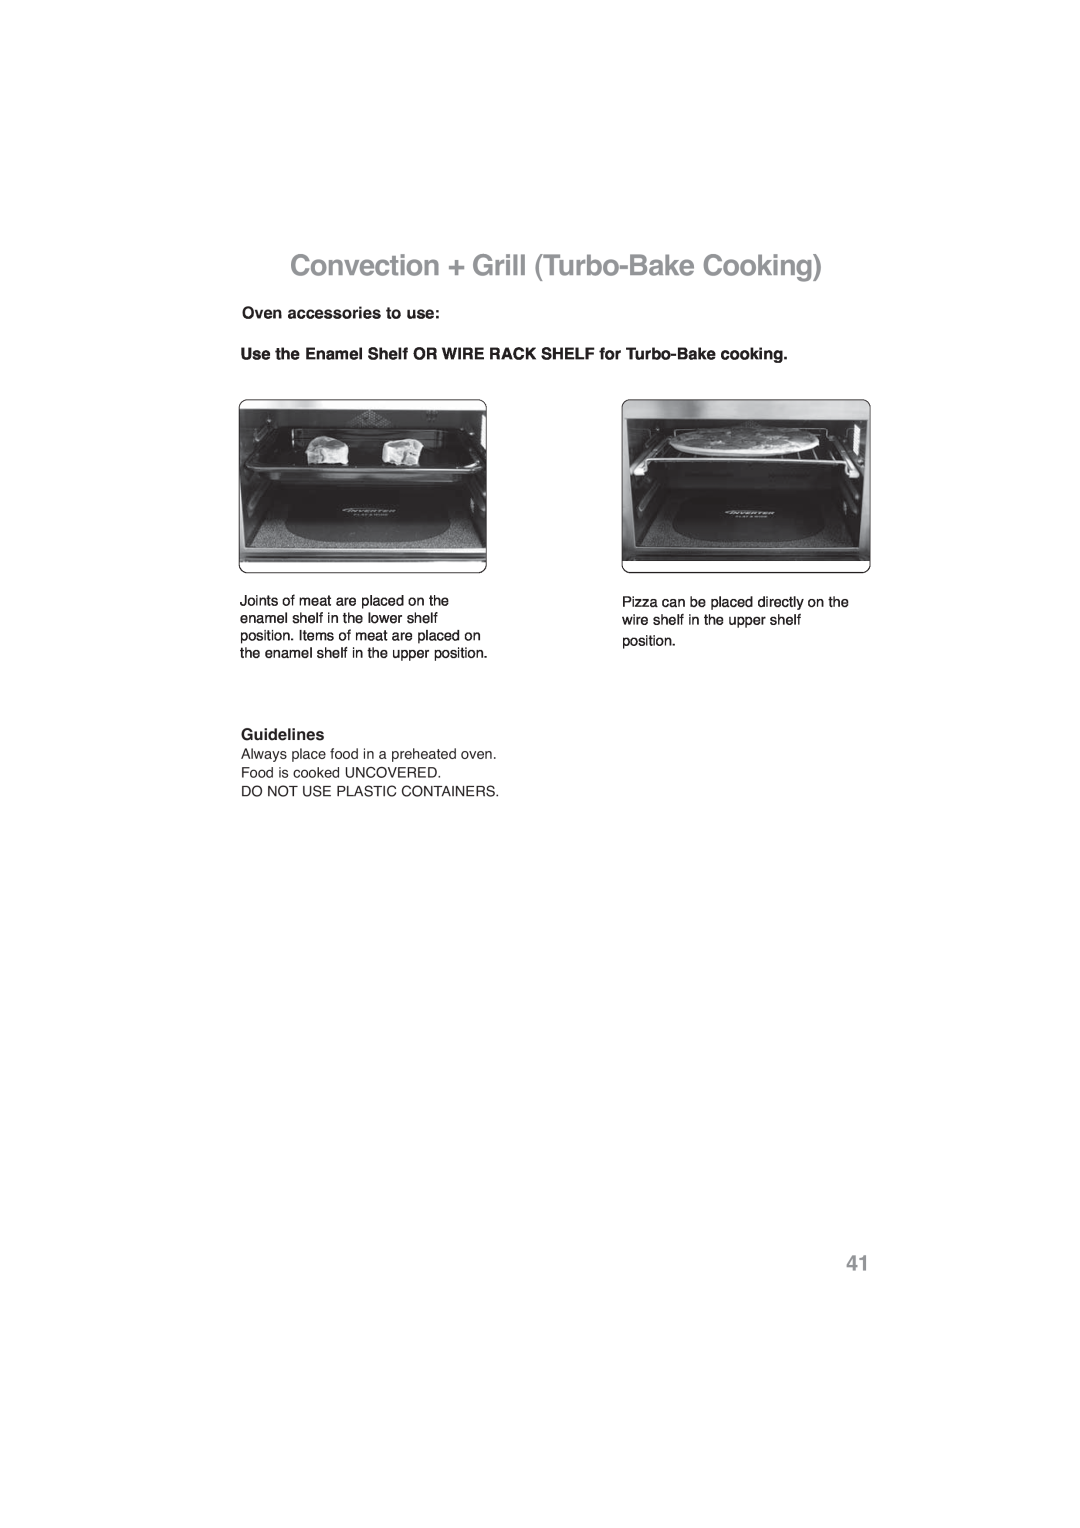 Panasonic NN-CF778S, NN-CF768M Convection + Grill Turbo-BakeCooking, Oven accessories to use, Guidelines 